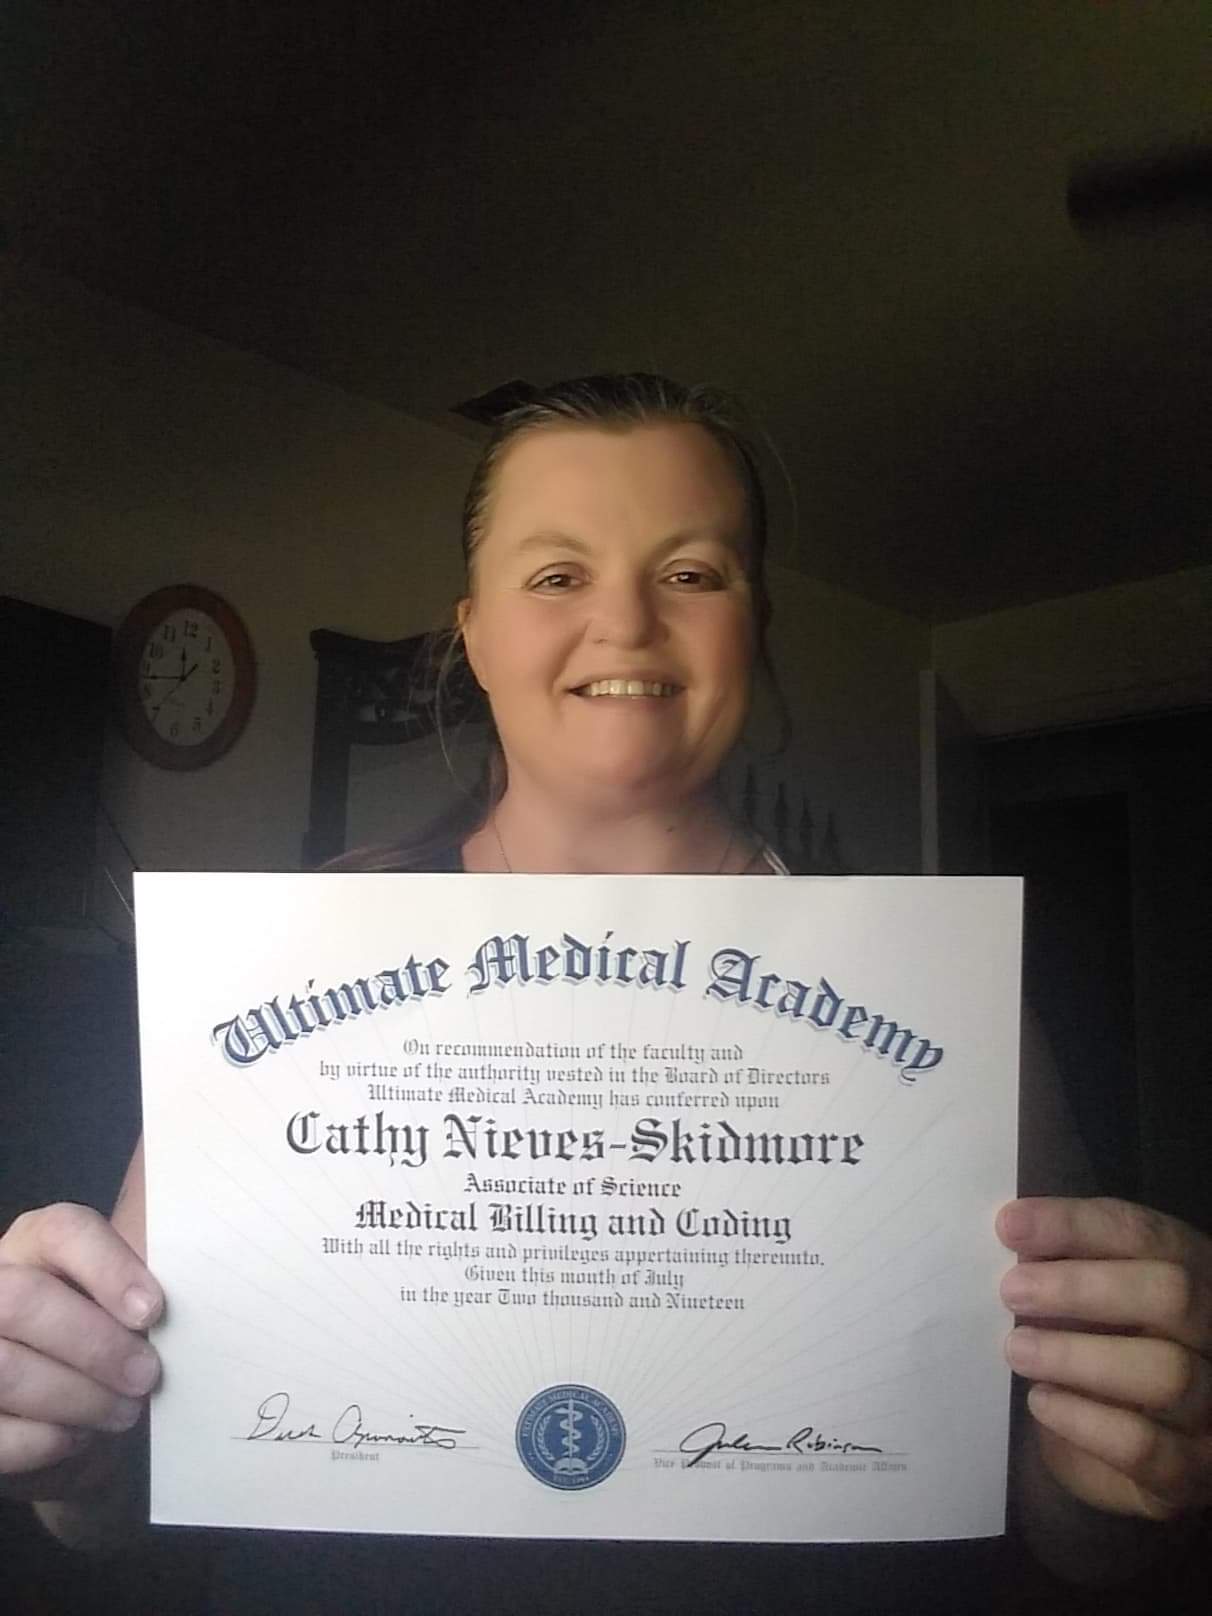 Cathy holding up her degree from Ultimate Medical Academy in 2019.